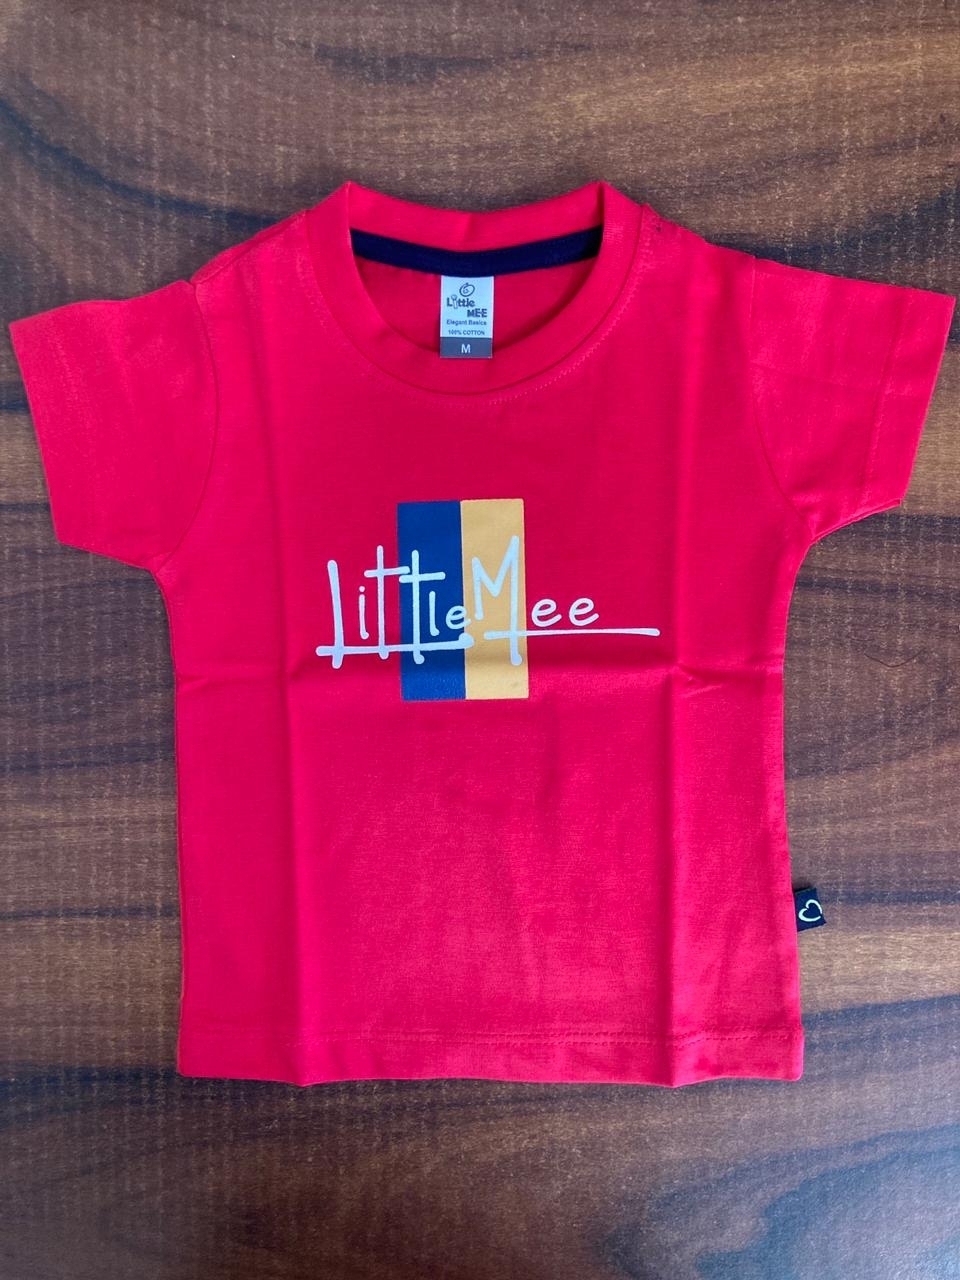 Little Mee Mee Round Neck T-Shirts